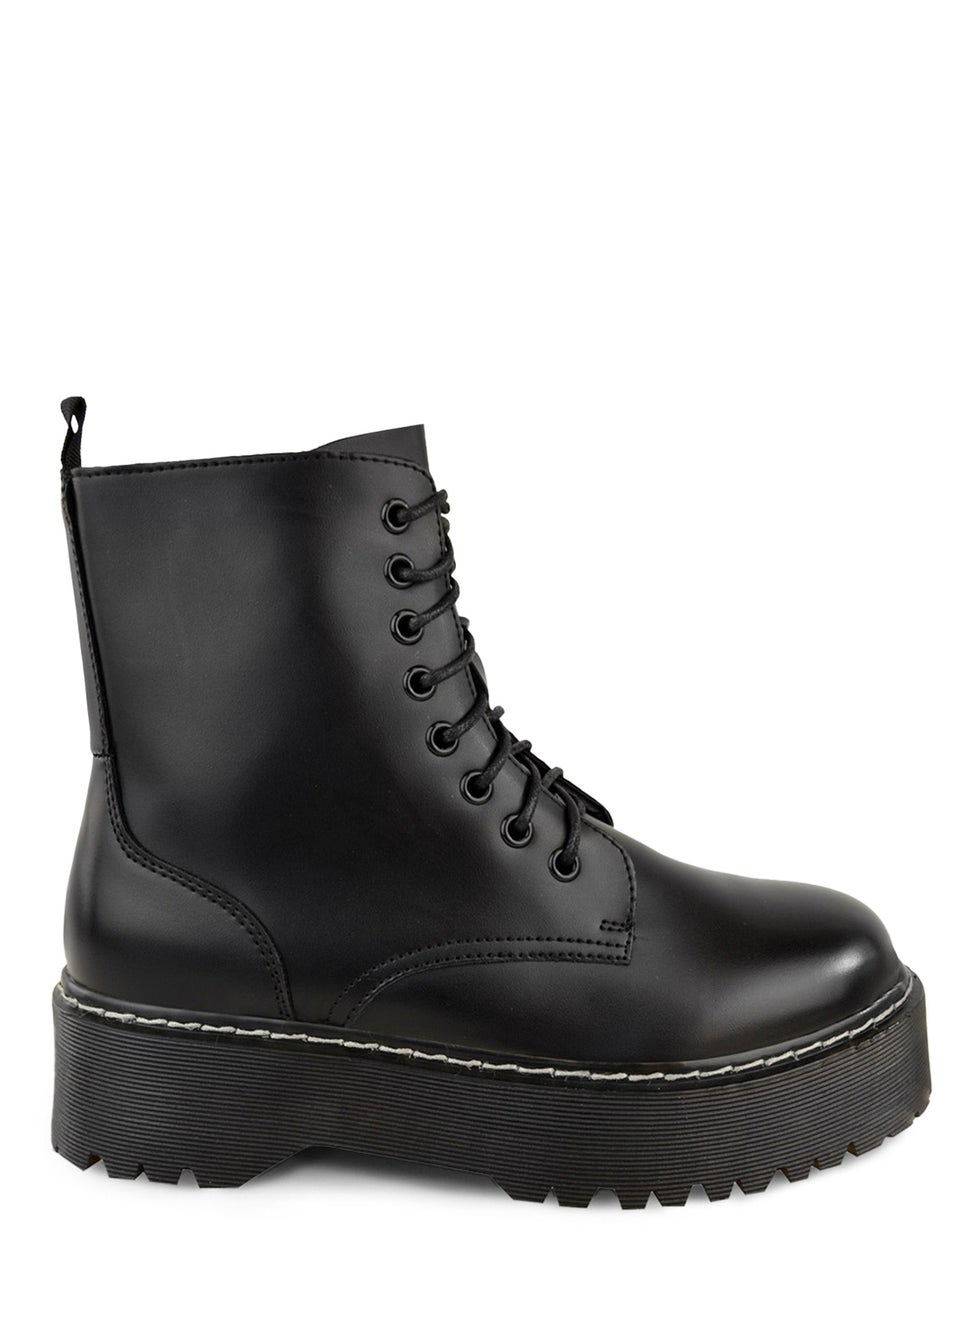 Where's That From Black Pu Brynn Lace Up Ankle Boots